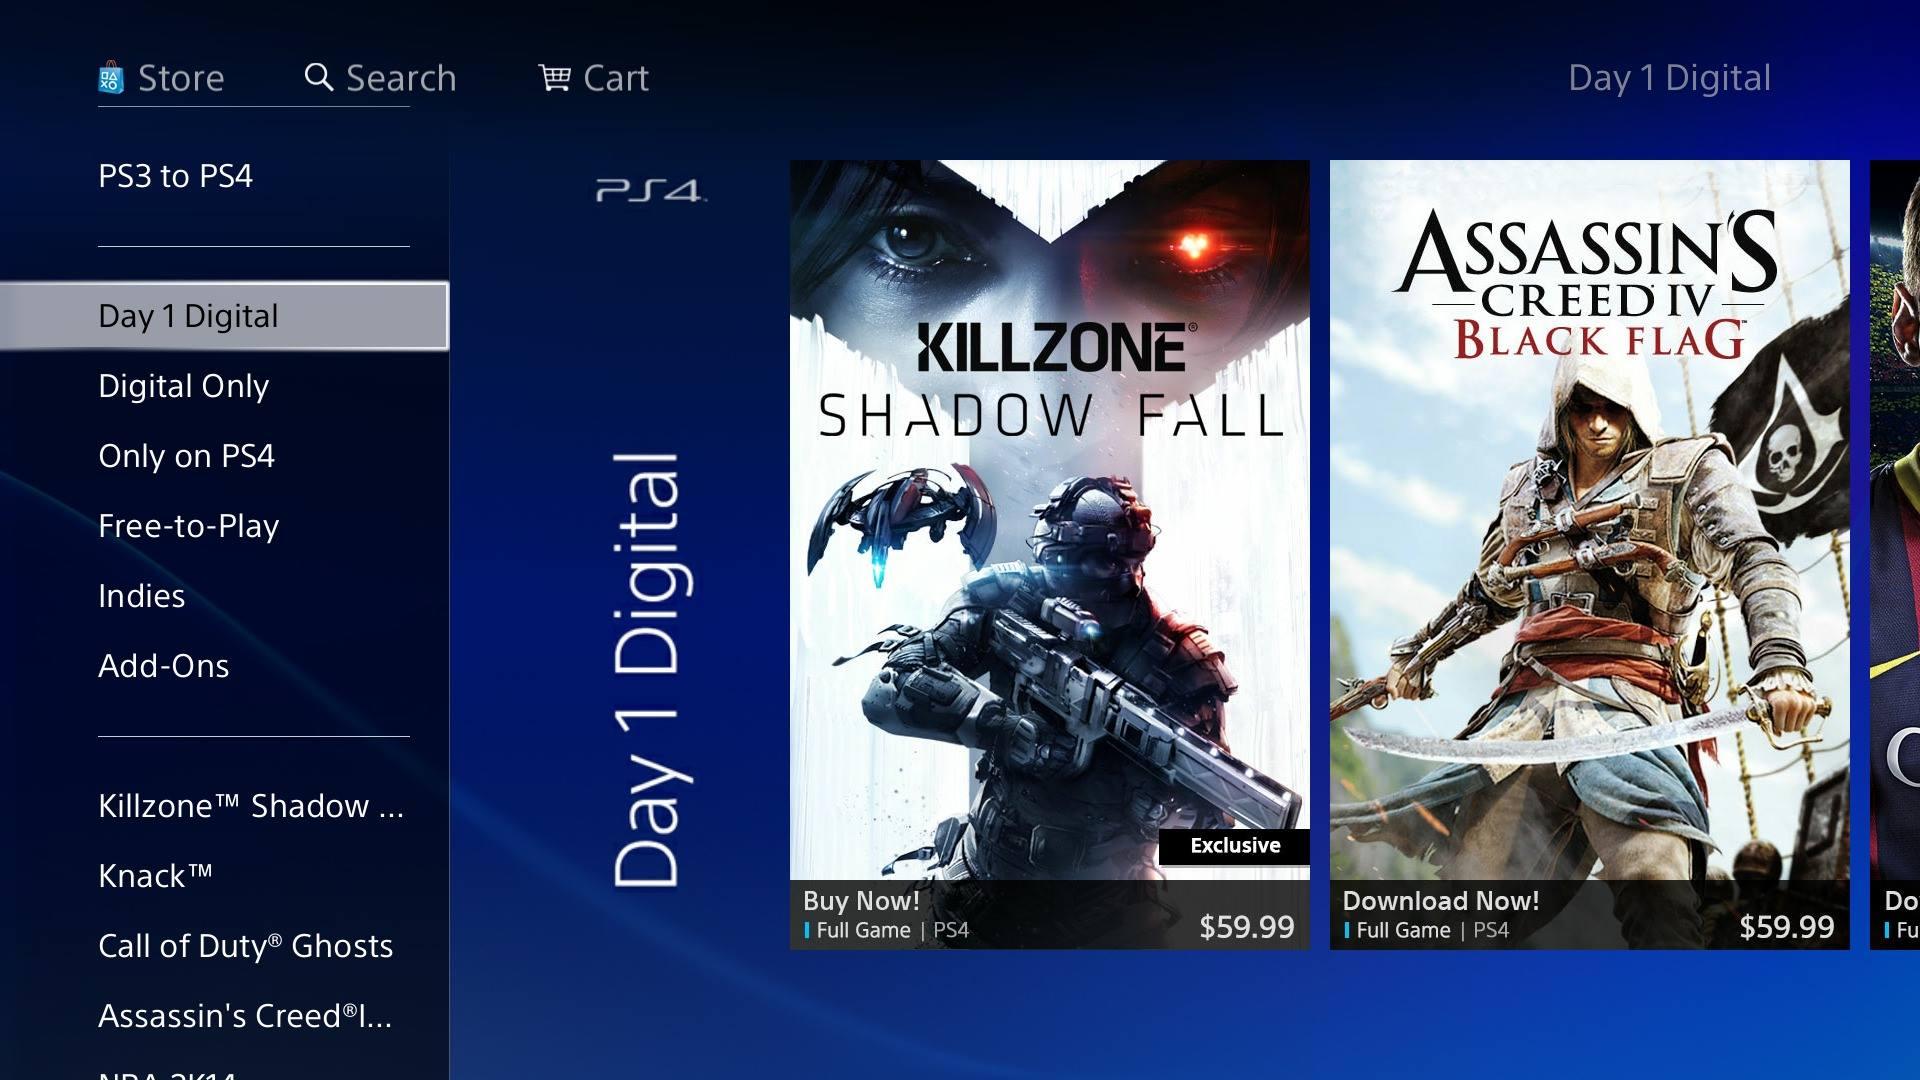 How to Get a Refund From the PlayStation Store